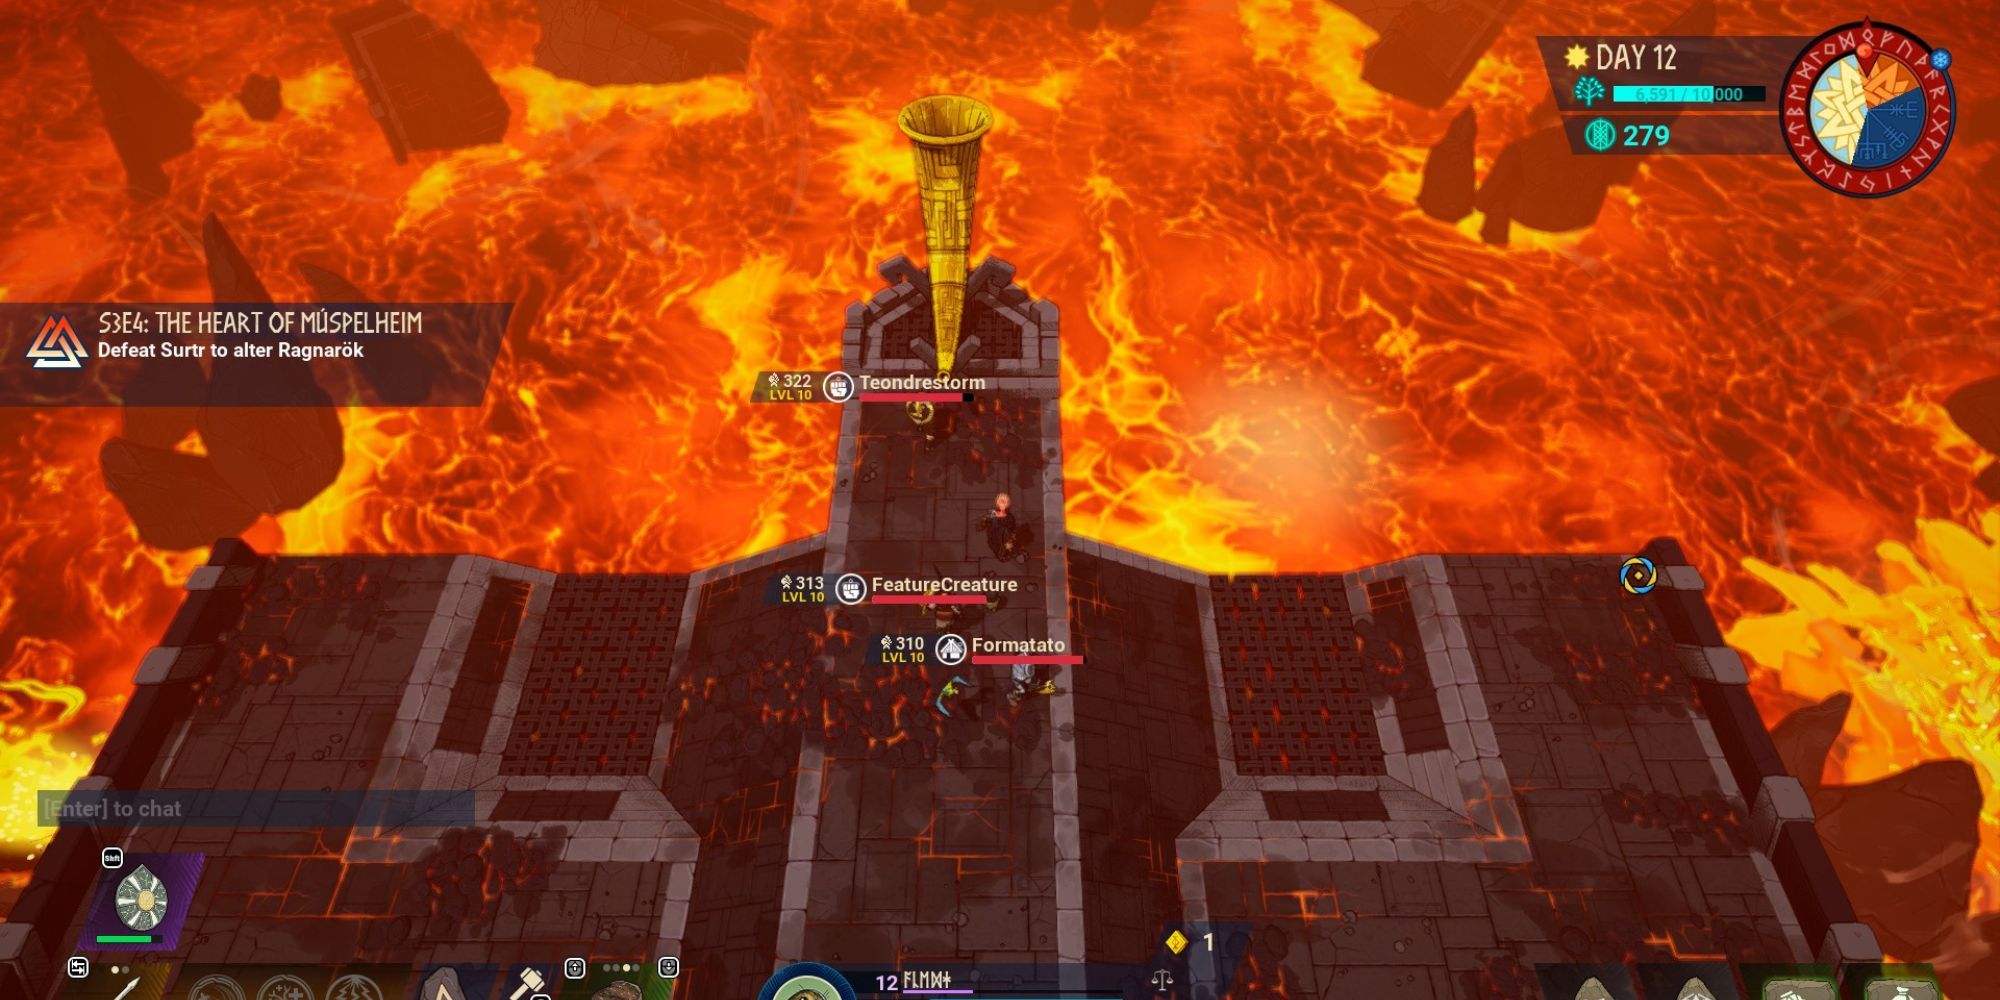 group of four players summon Surtr in his domain